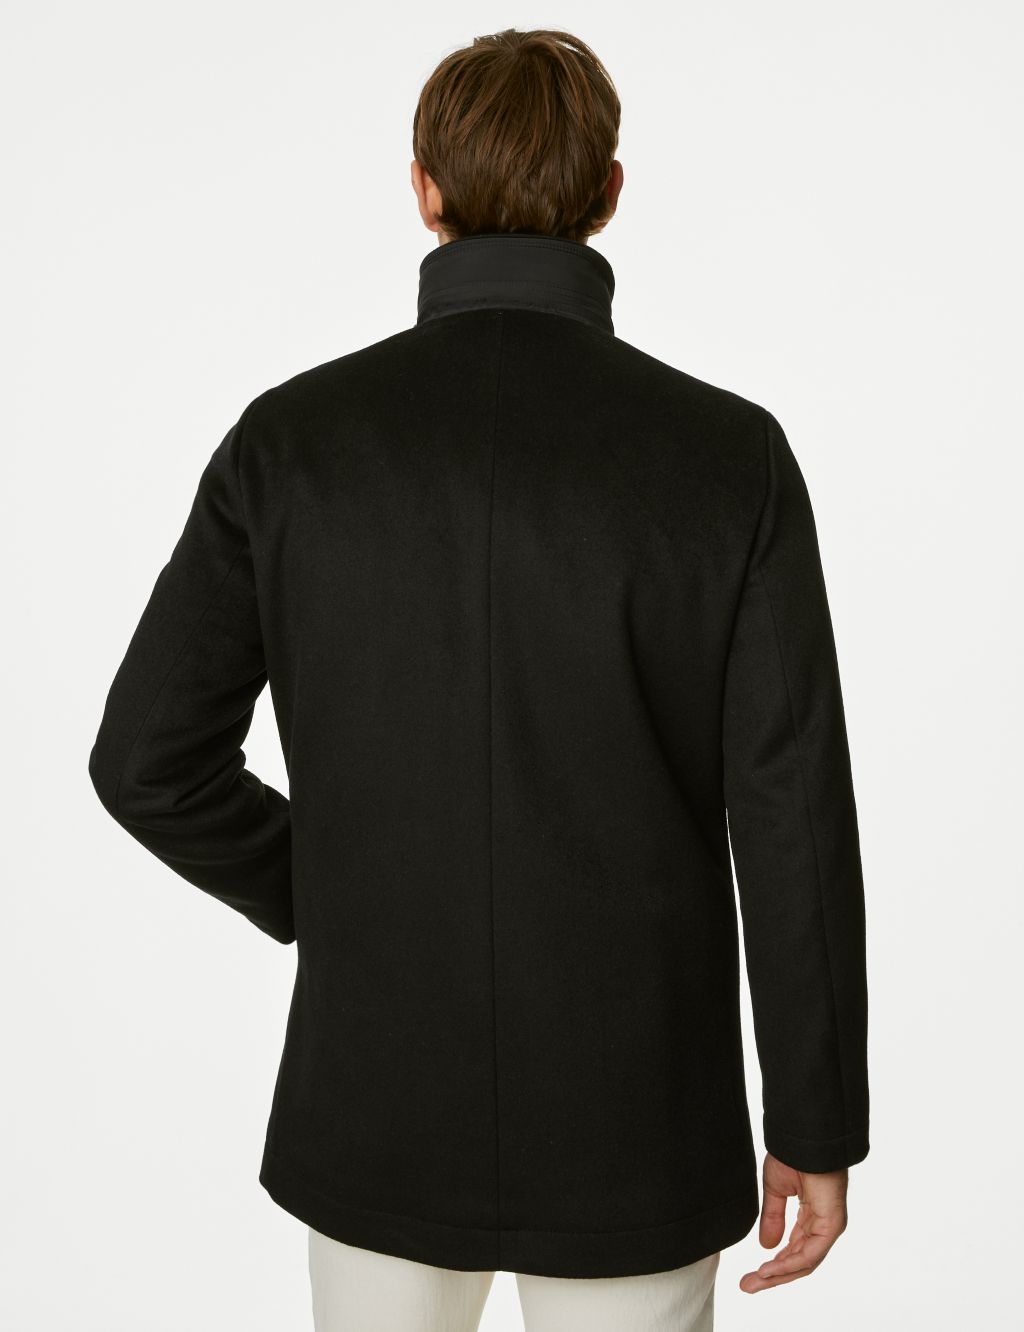 Wool Blend Double Collar Jacket image 6